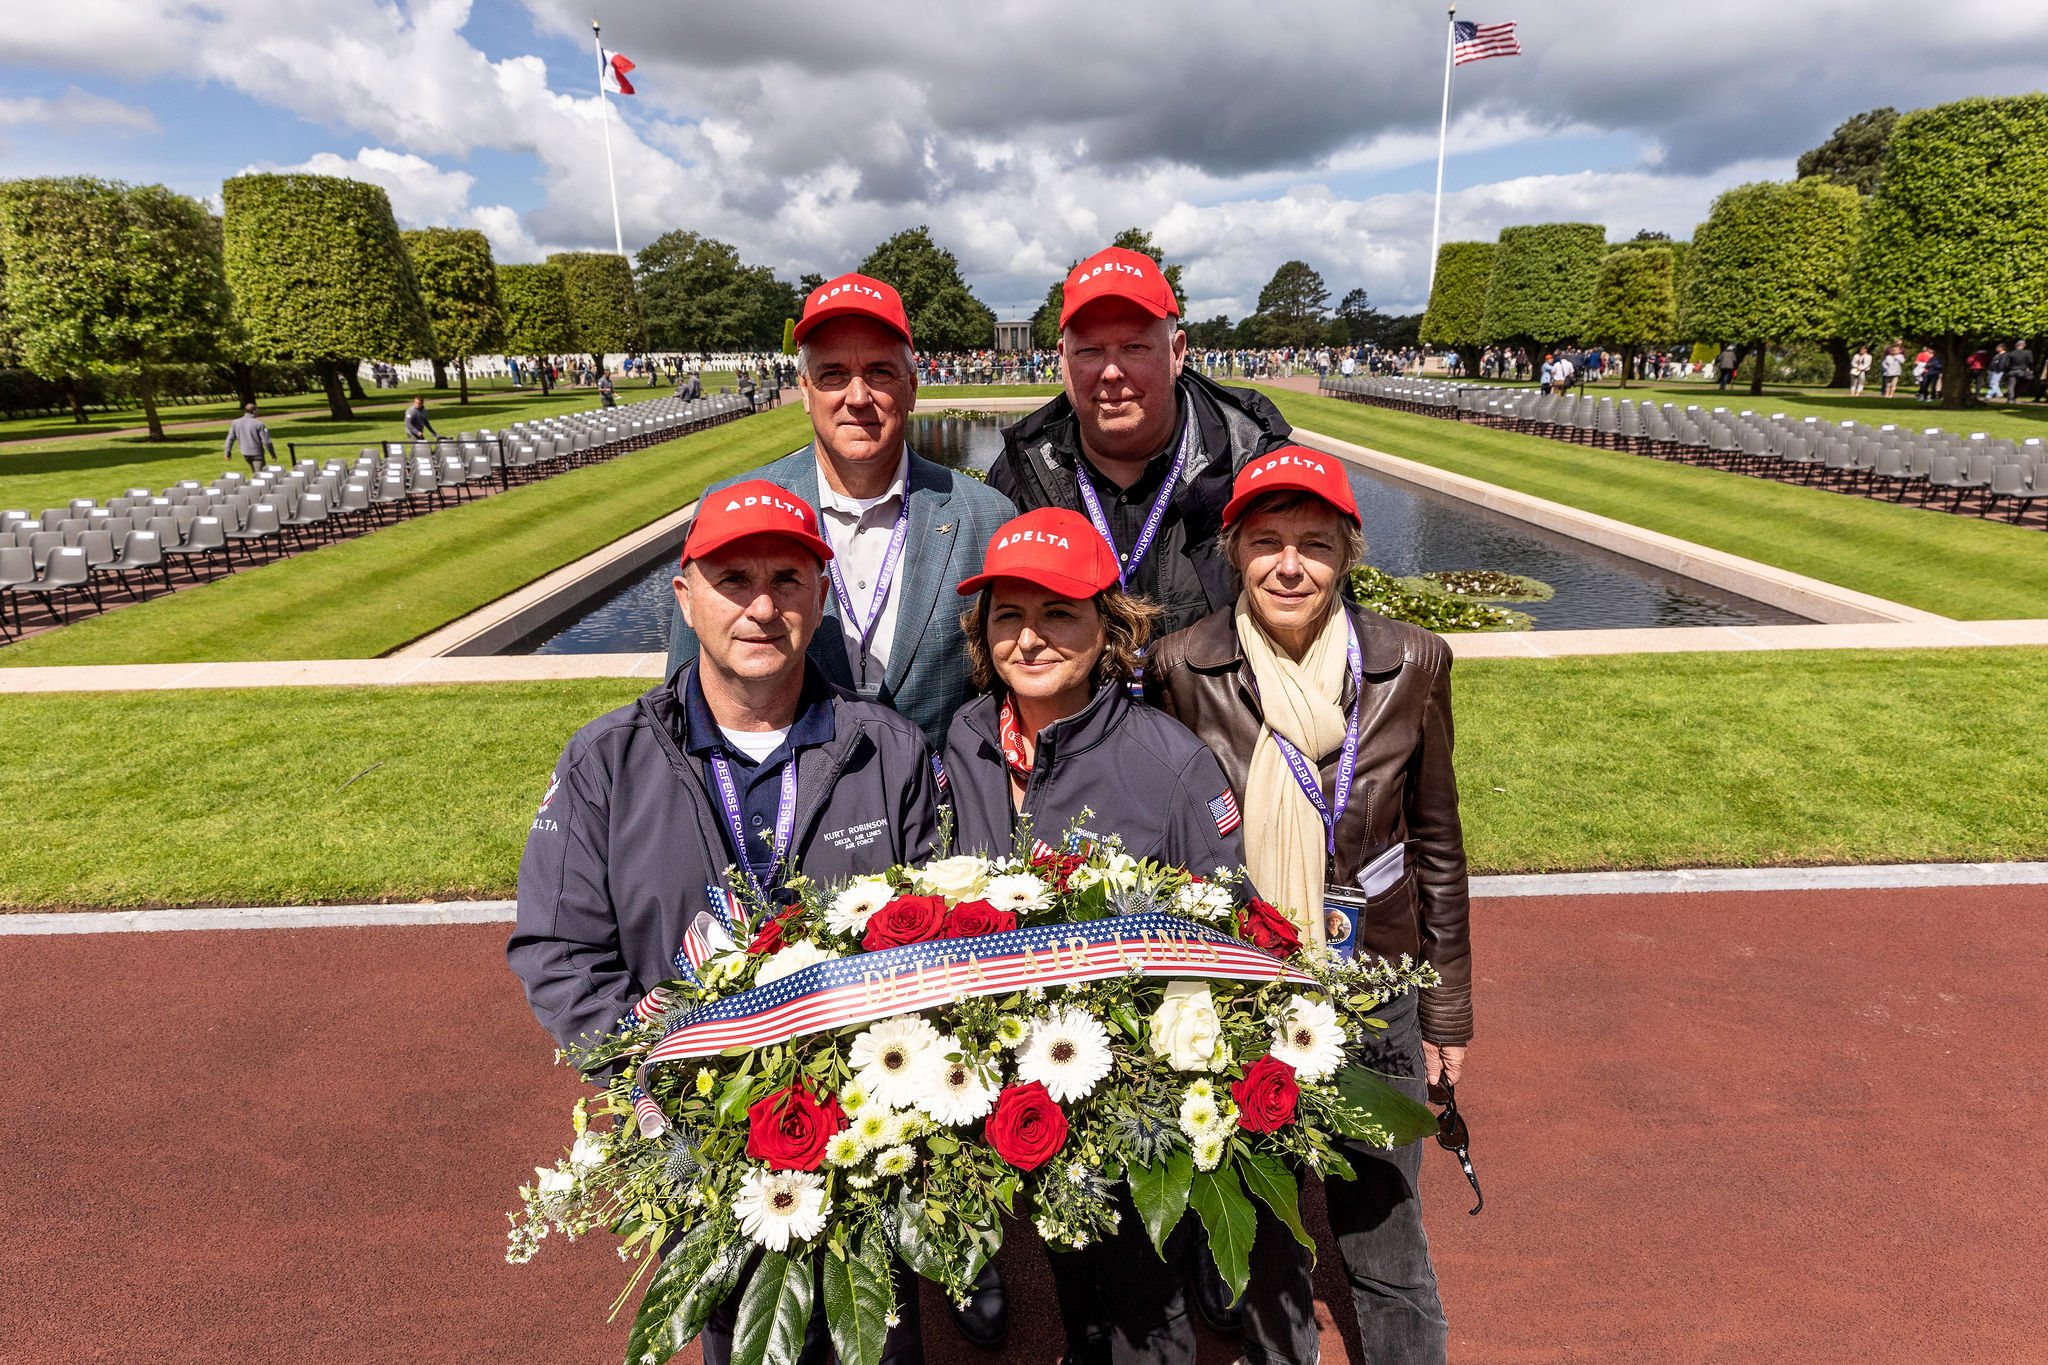 Delta’s Kurt Robinson, Virginie Durr, Beatrice deRotalier, Chris Jones and Paul Hassenstab at Normandy American Cemetery and Memorial on D-Day.